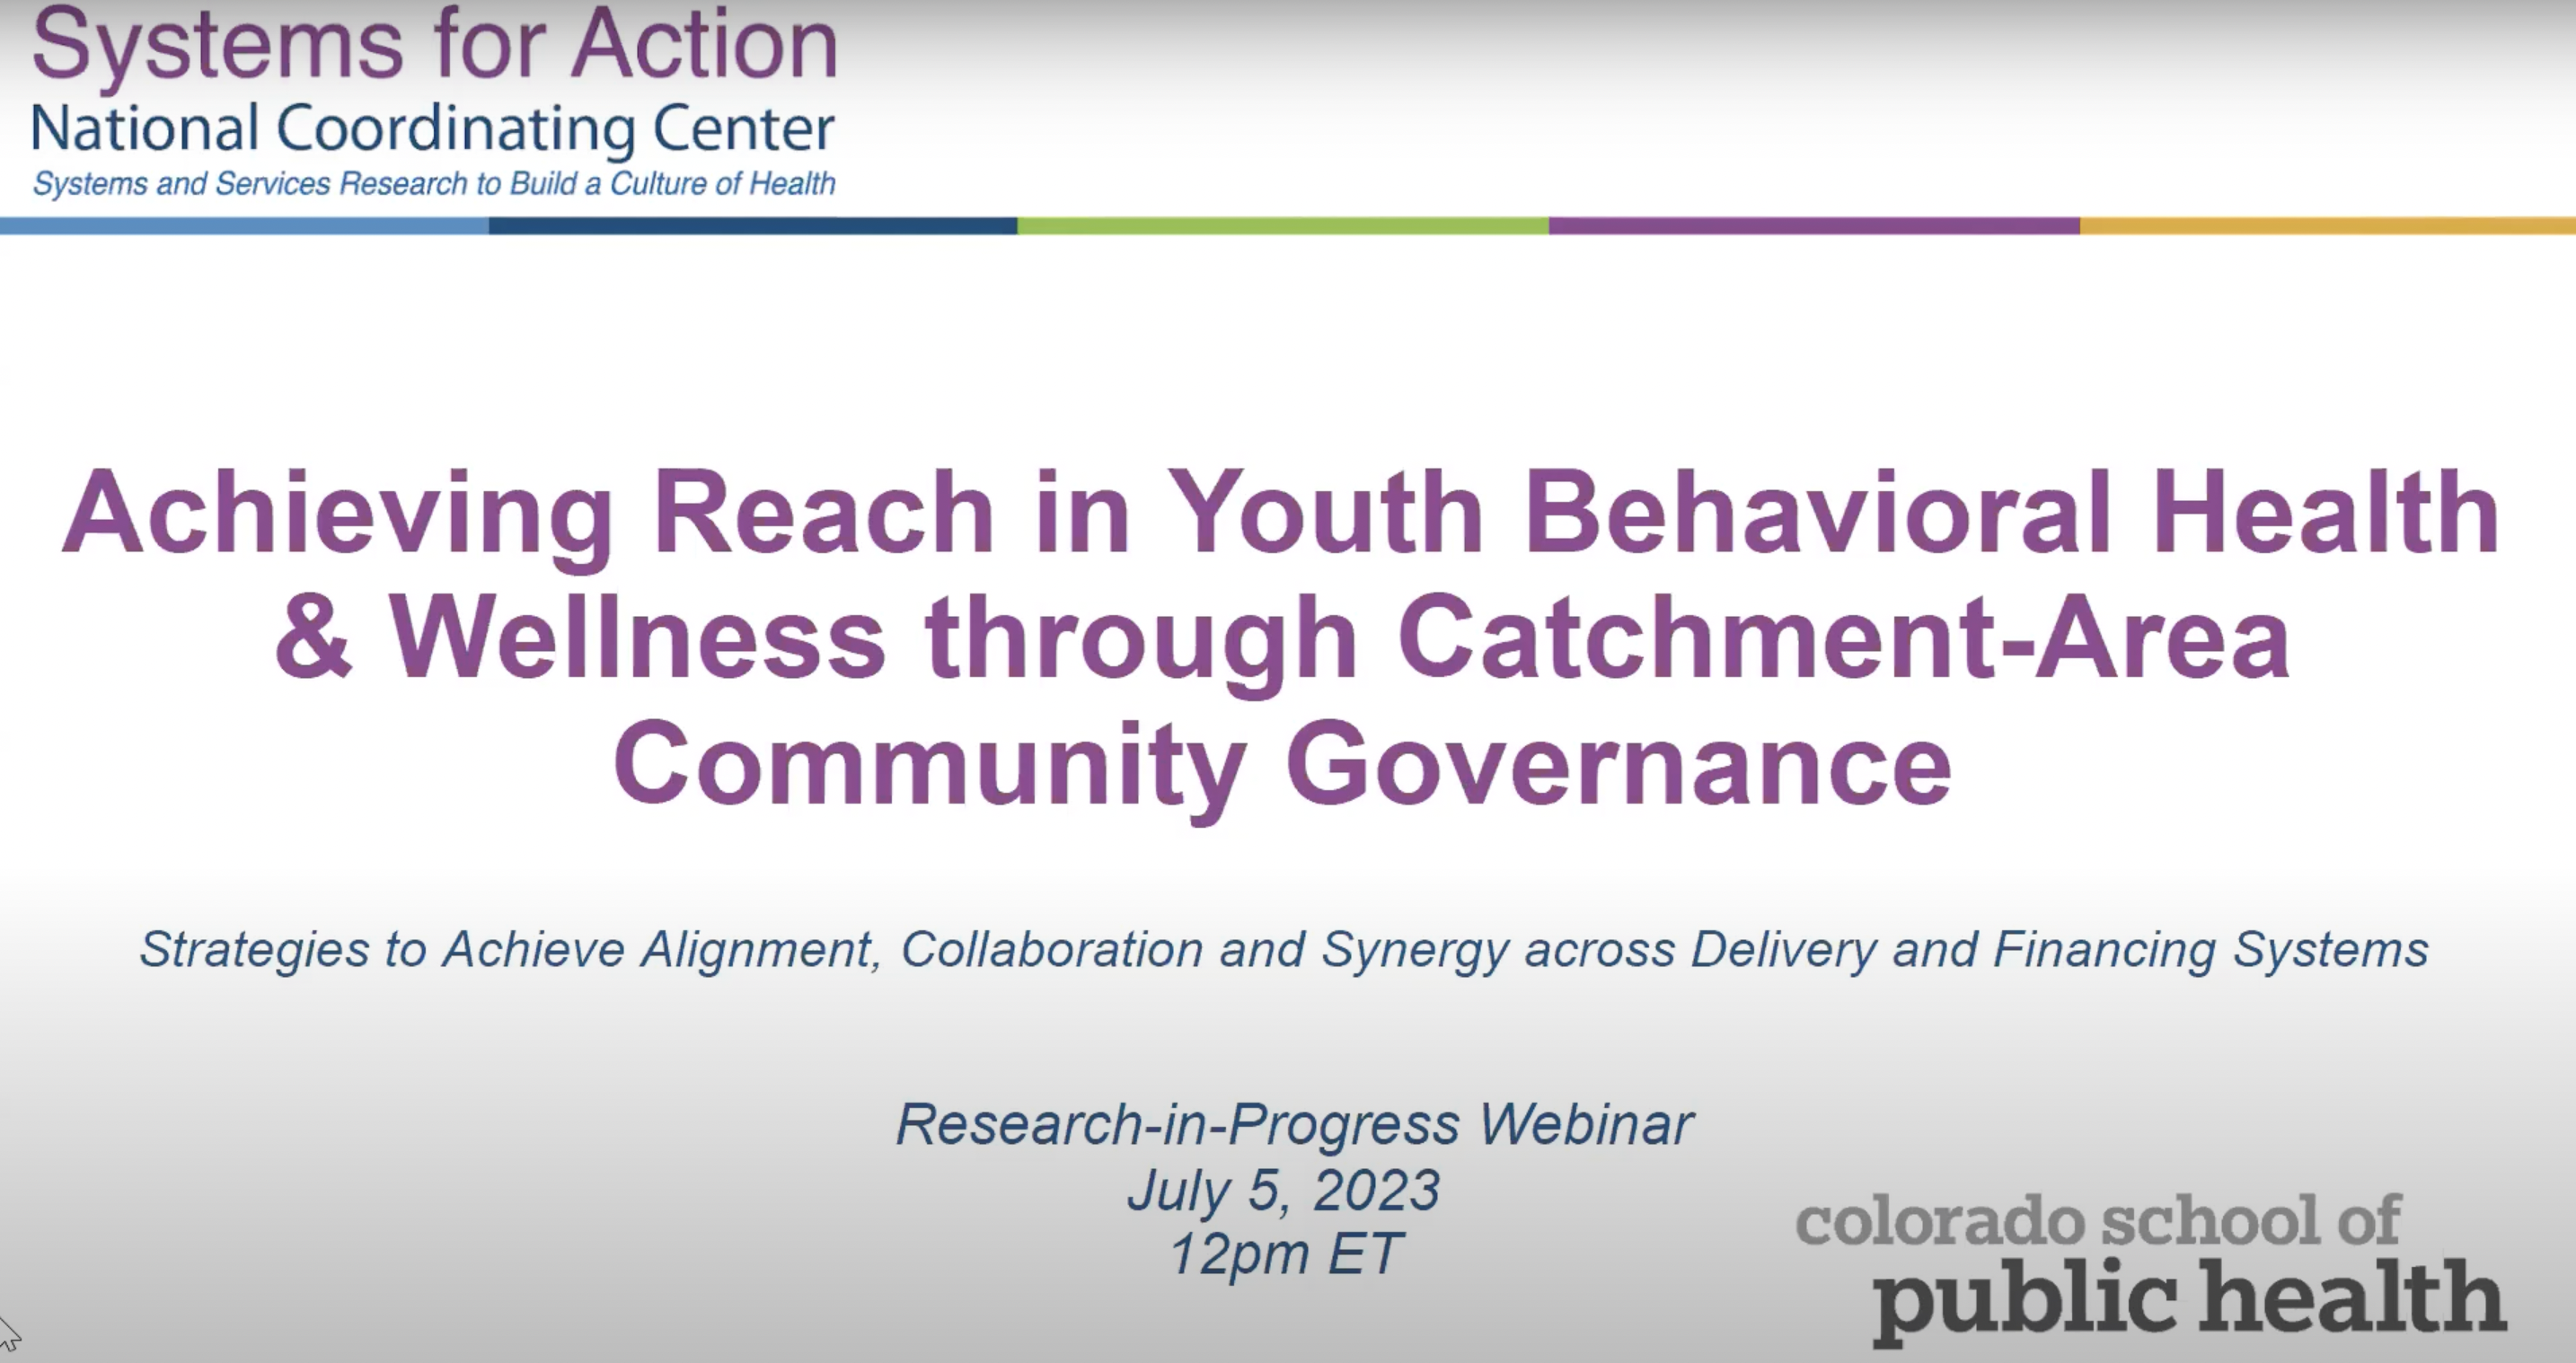 Webinar: Achieving Reach in Youth Behavioral Health and Wellness through Catchment-Area Community Governance